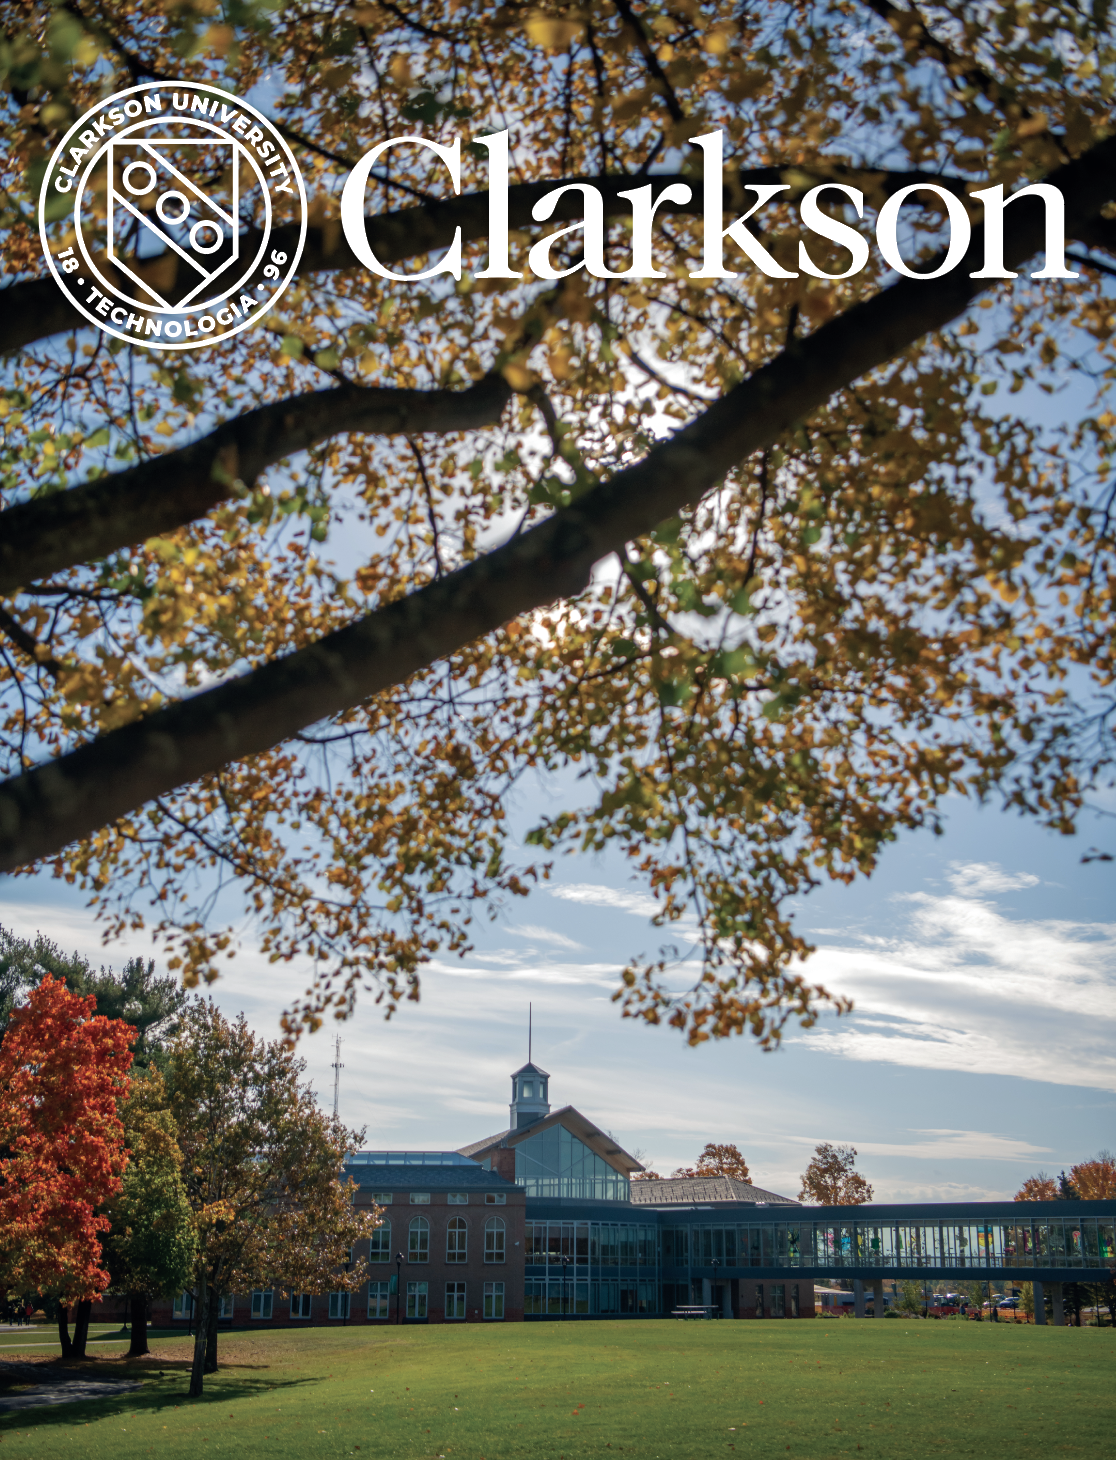 The folder cover shows the Student Center in the distance, with fall foliage in the foreground. It includes the Clarkson lockup logo.